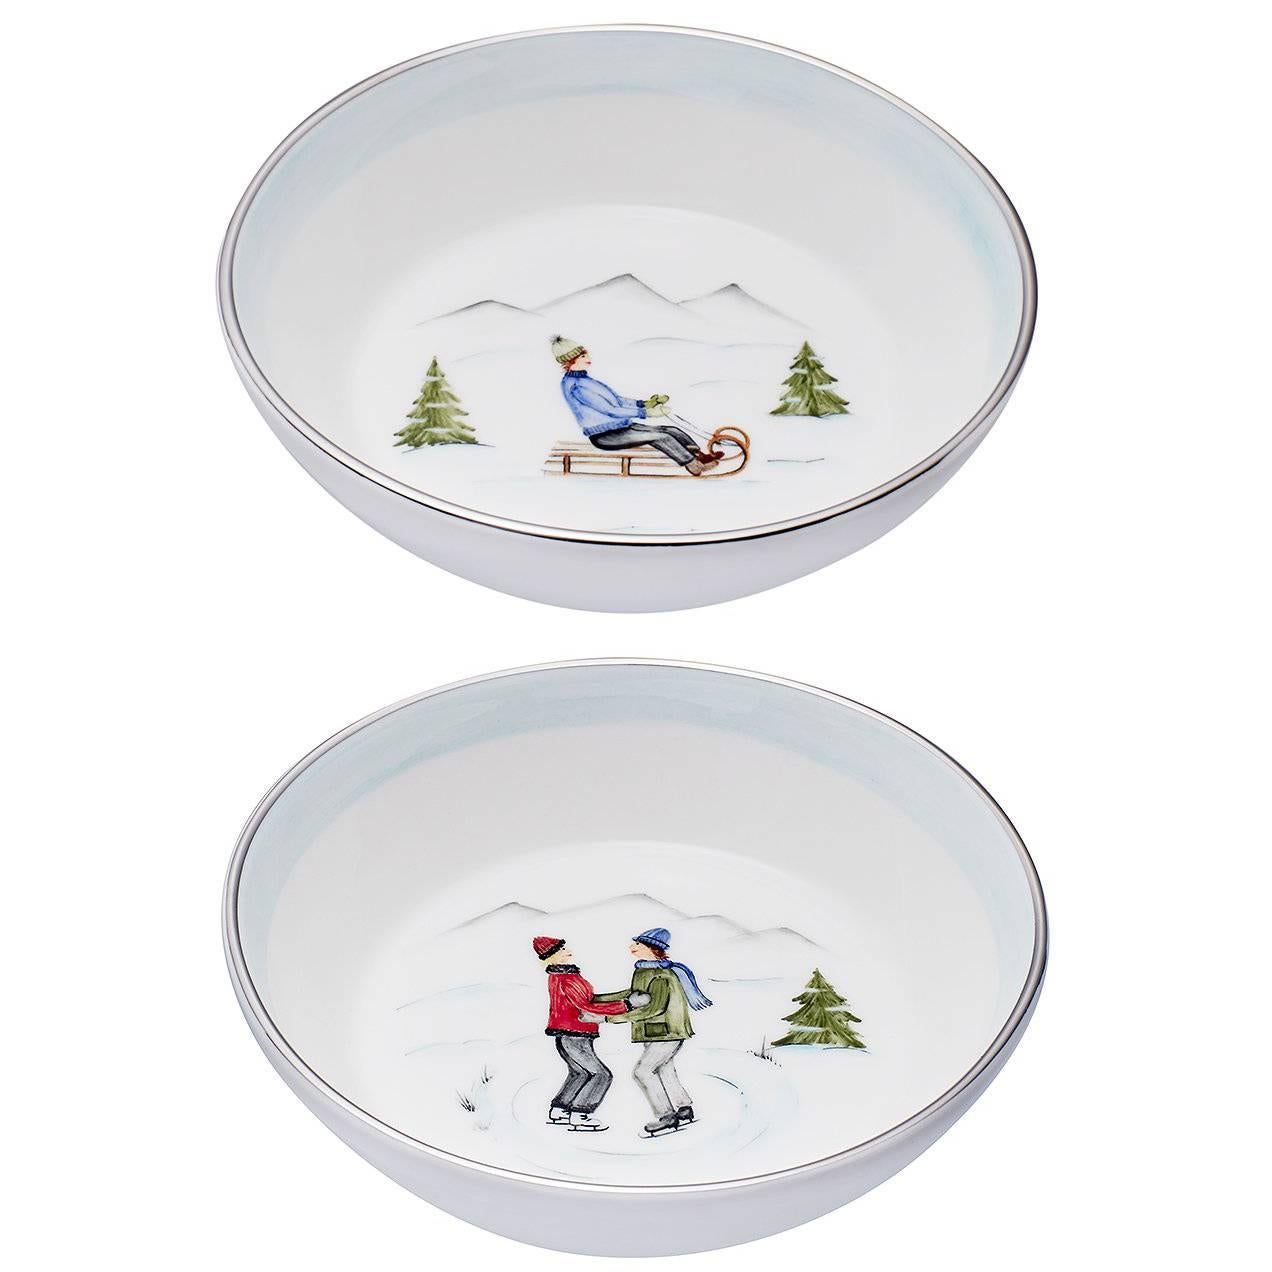  Set of Two Porcelain Dishes with Winter Decor Sofina Boutique Kitzbuehel